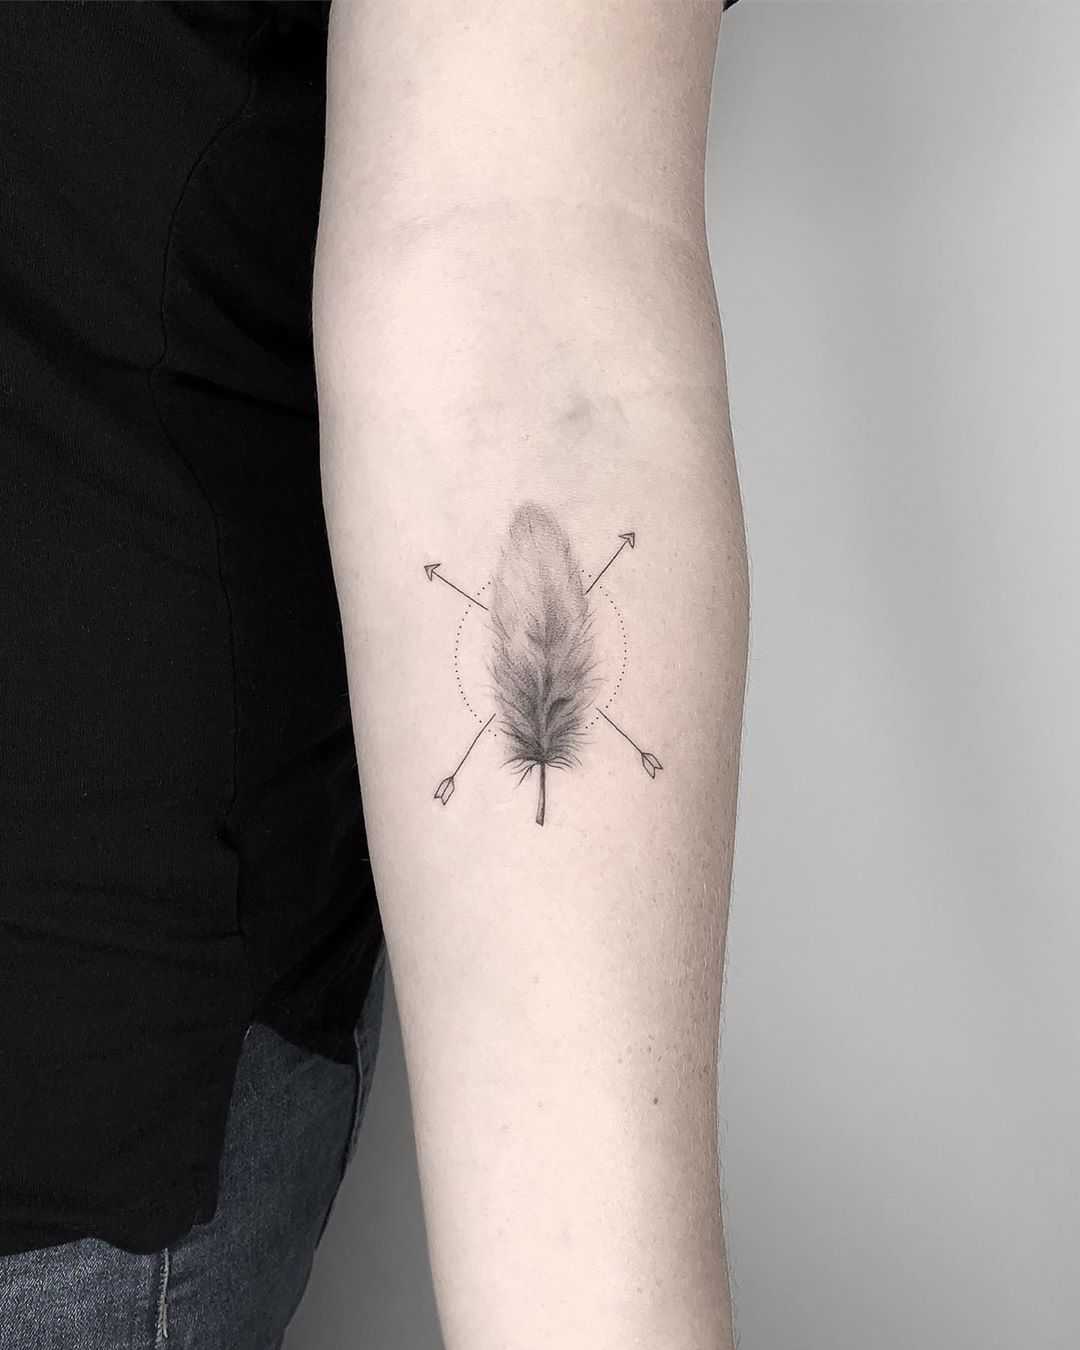 Fineline feather tattoo by Conz Thomas